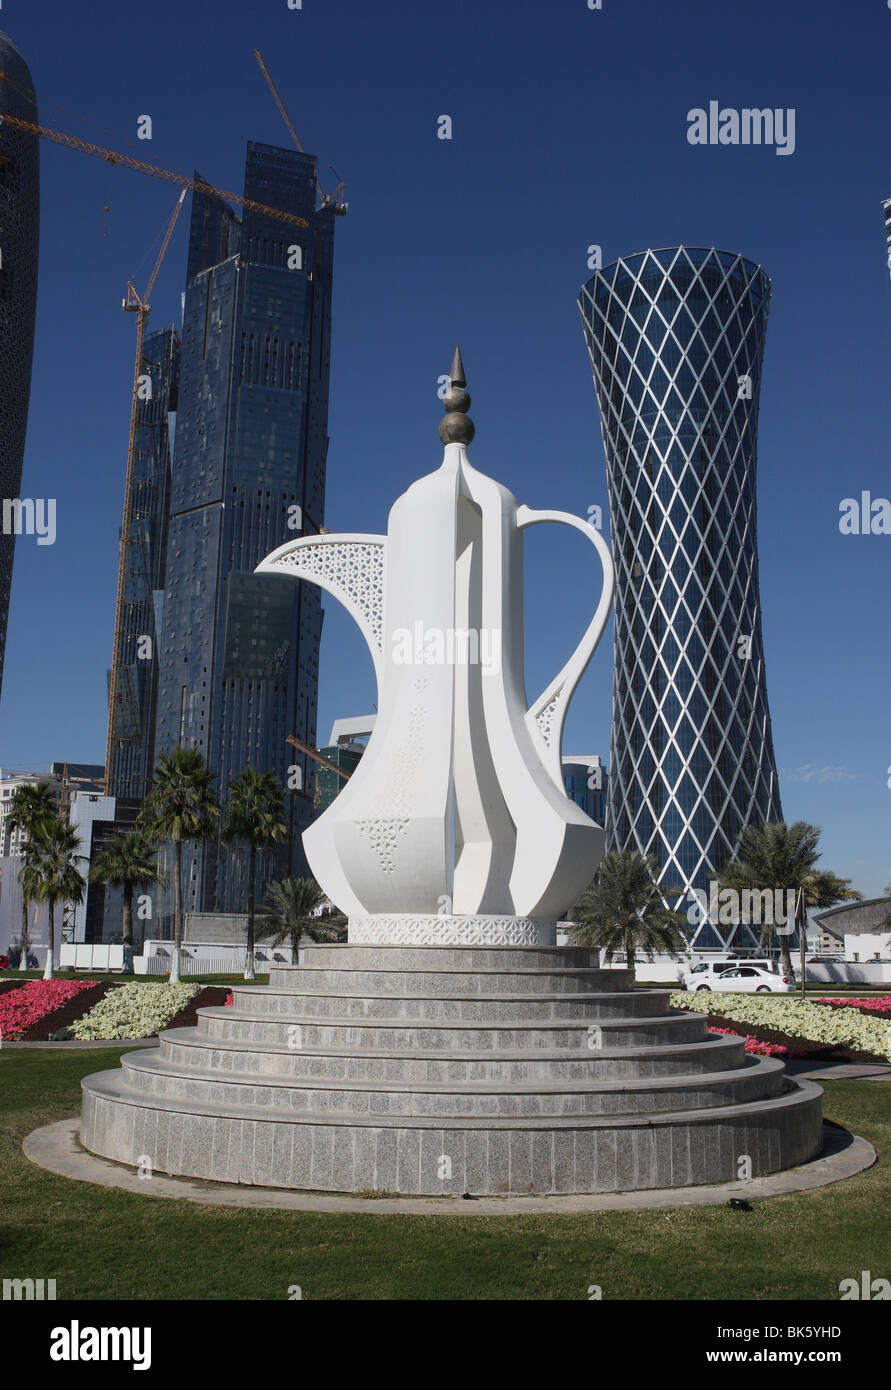 Innovative modern architecture, coffee pot sculpture on a roundabout in front of construction sites in Doha,Qatar Stock Photo